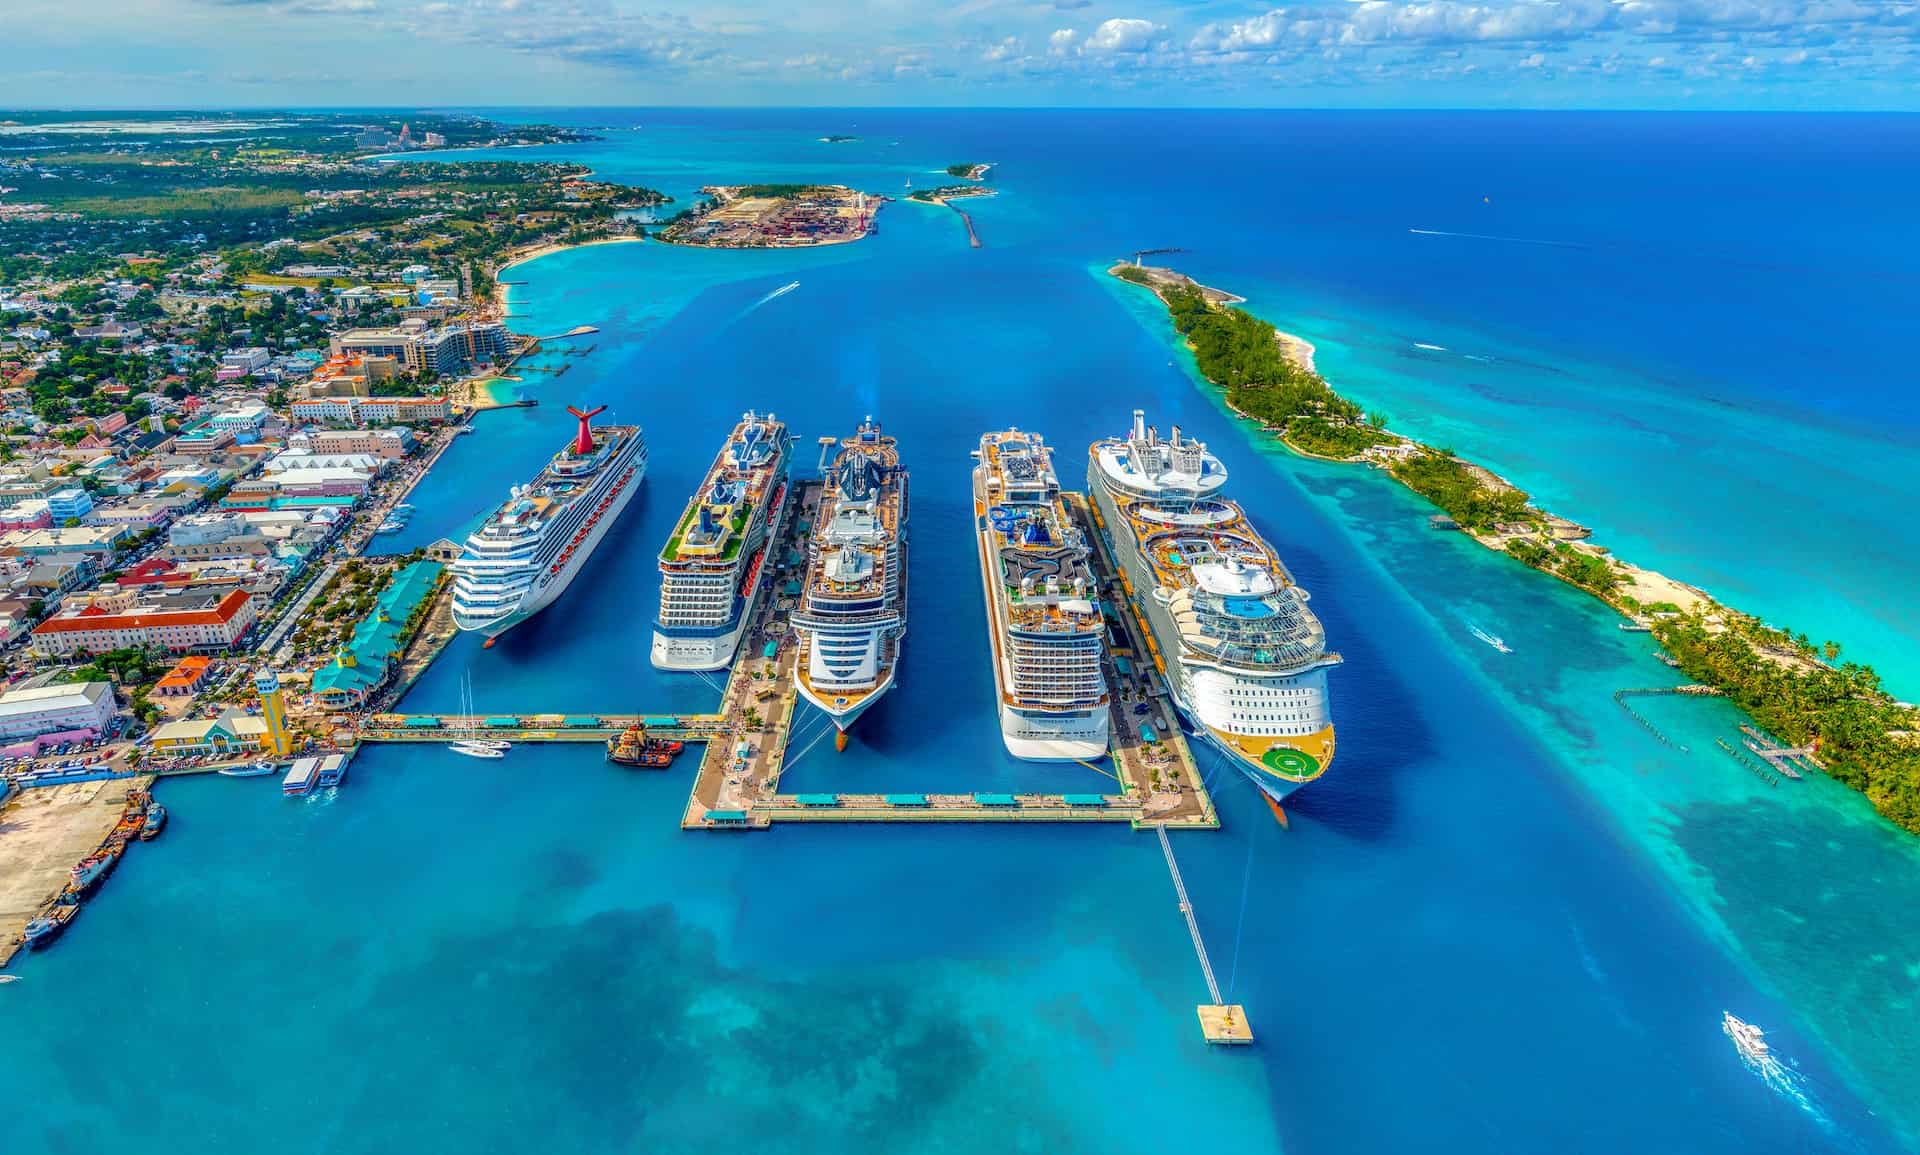 5 cruise ships in port in the Bahamas